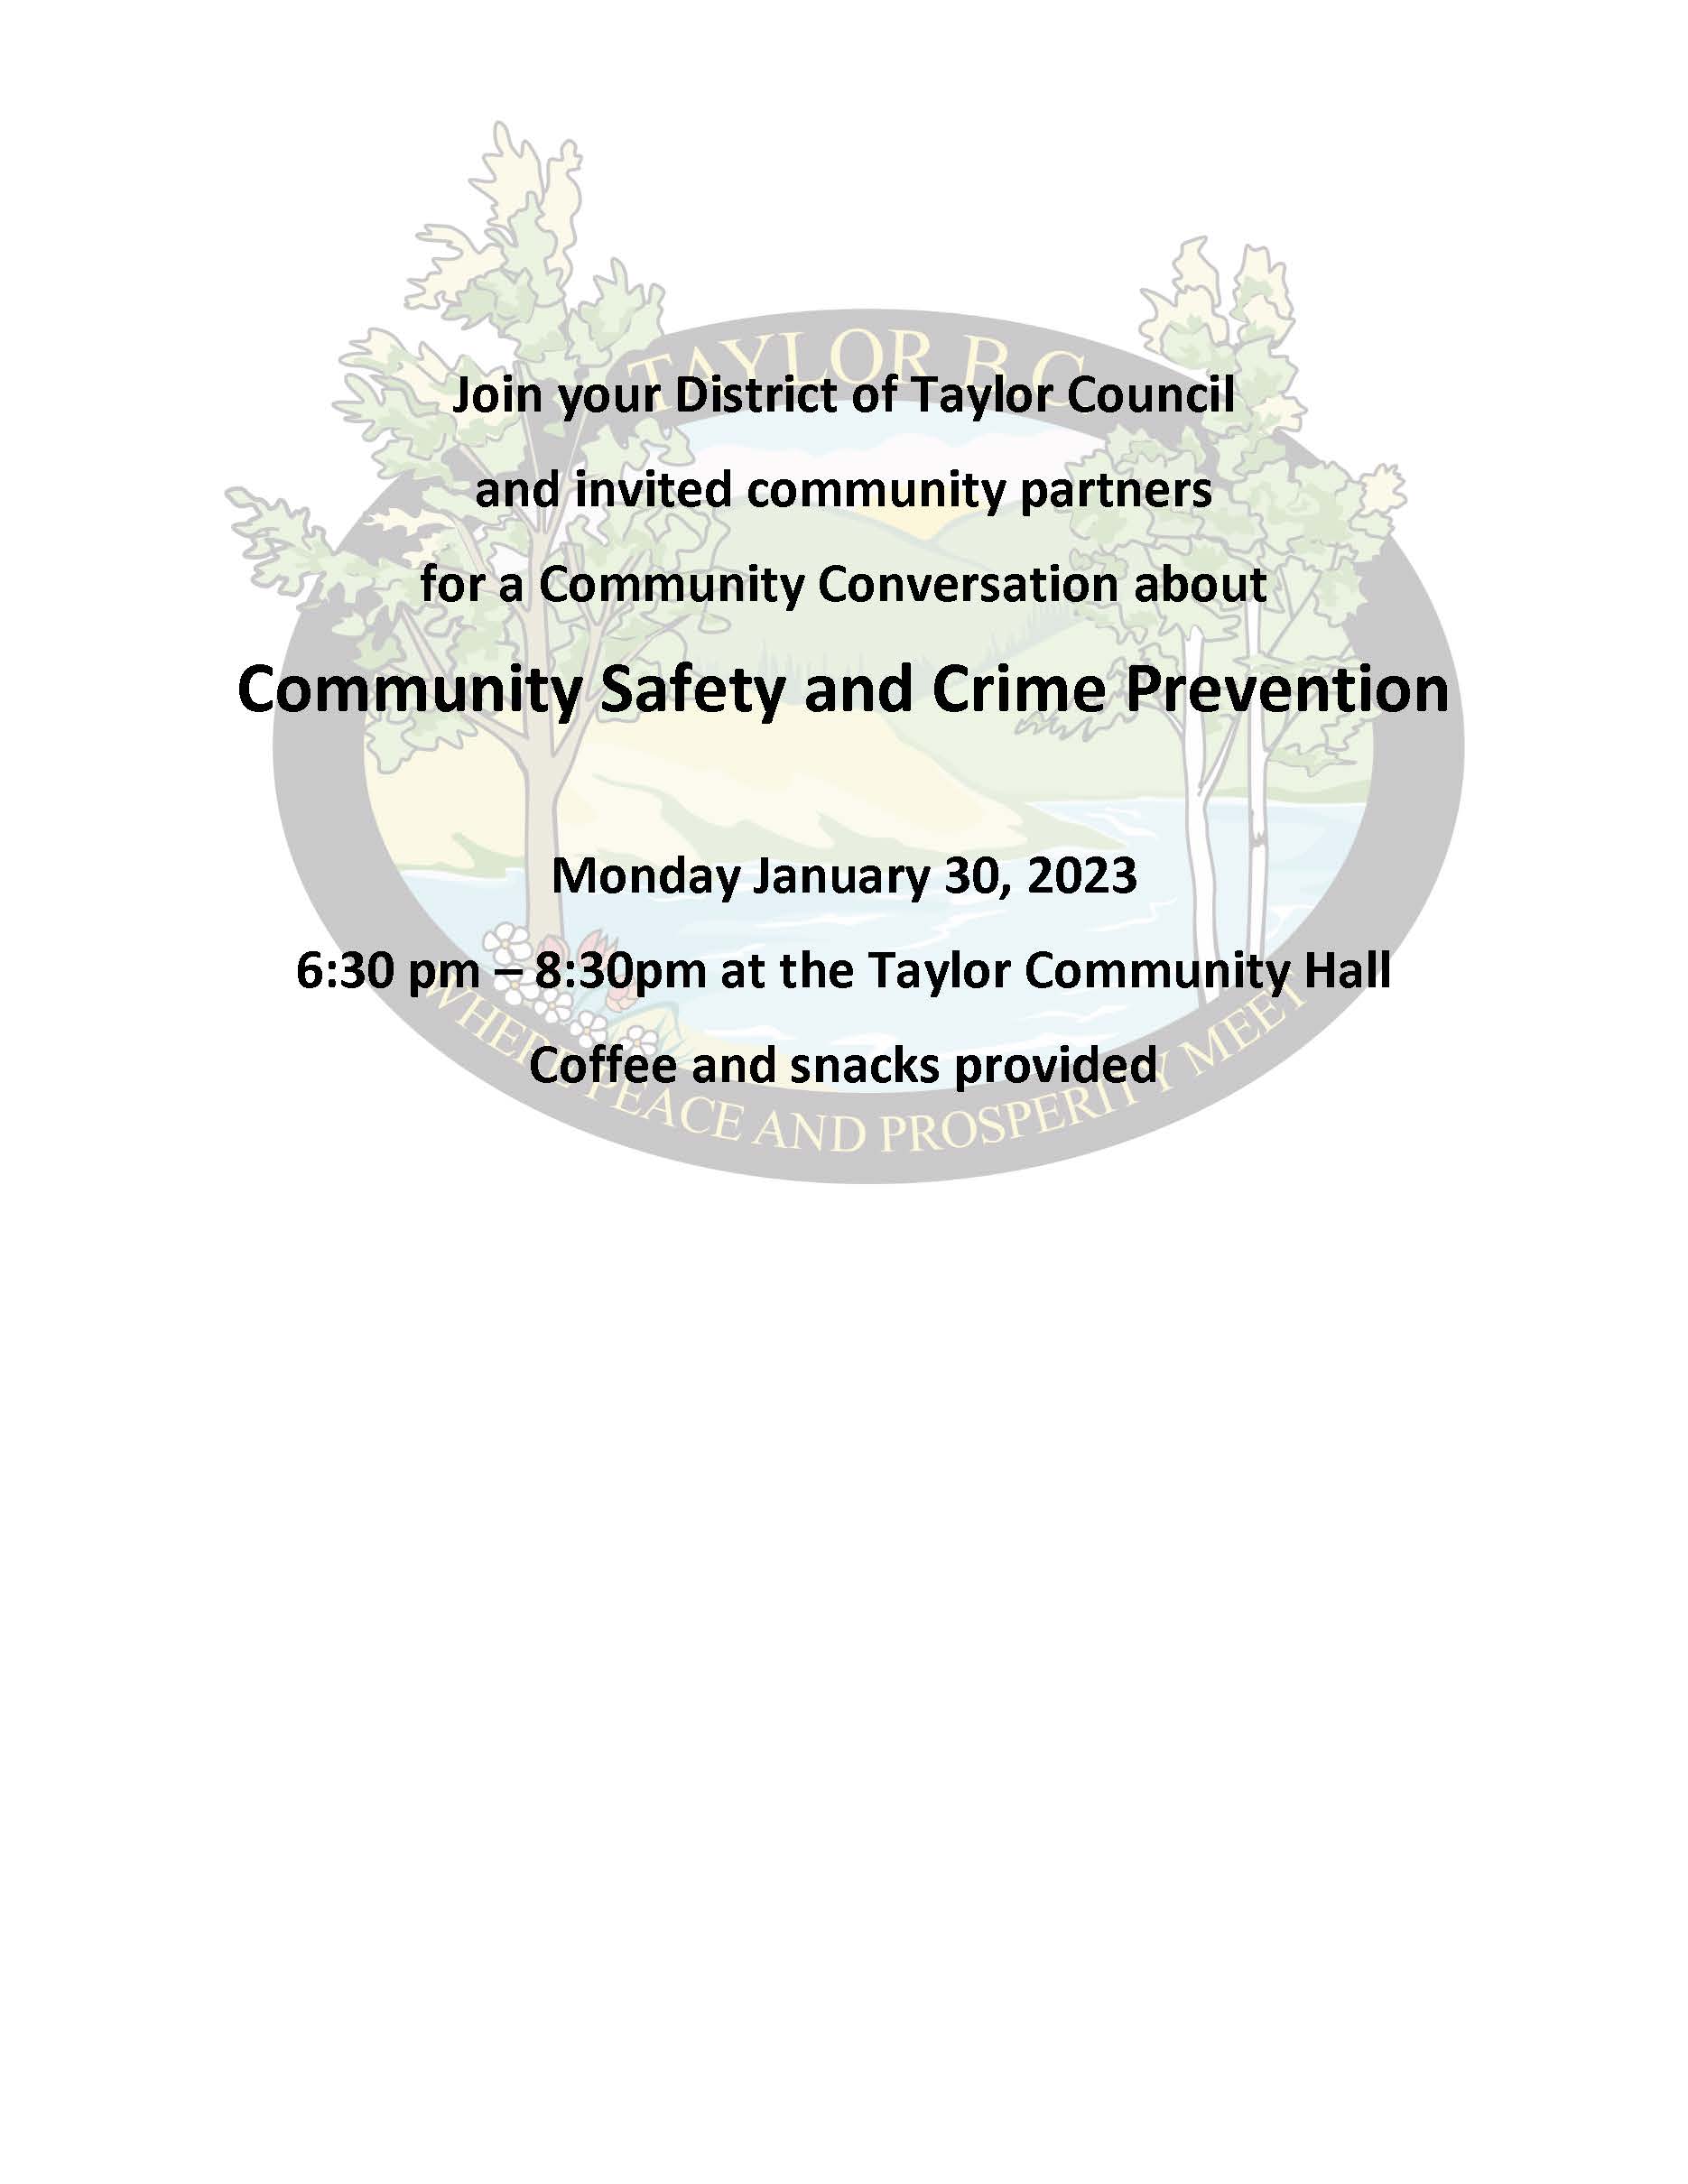 Join your District of Taylor Council and invited community partners for a Community Conversation about Community Safety and Crime Prevention